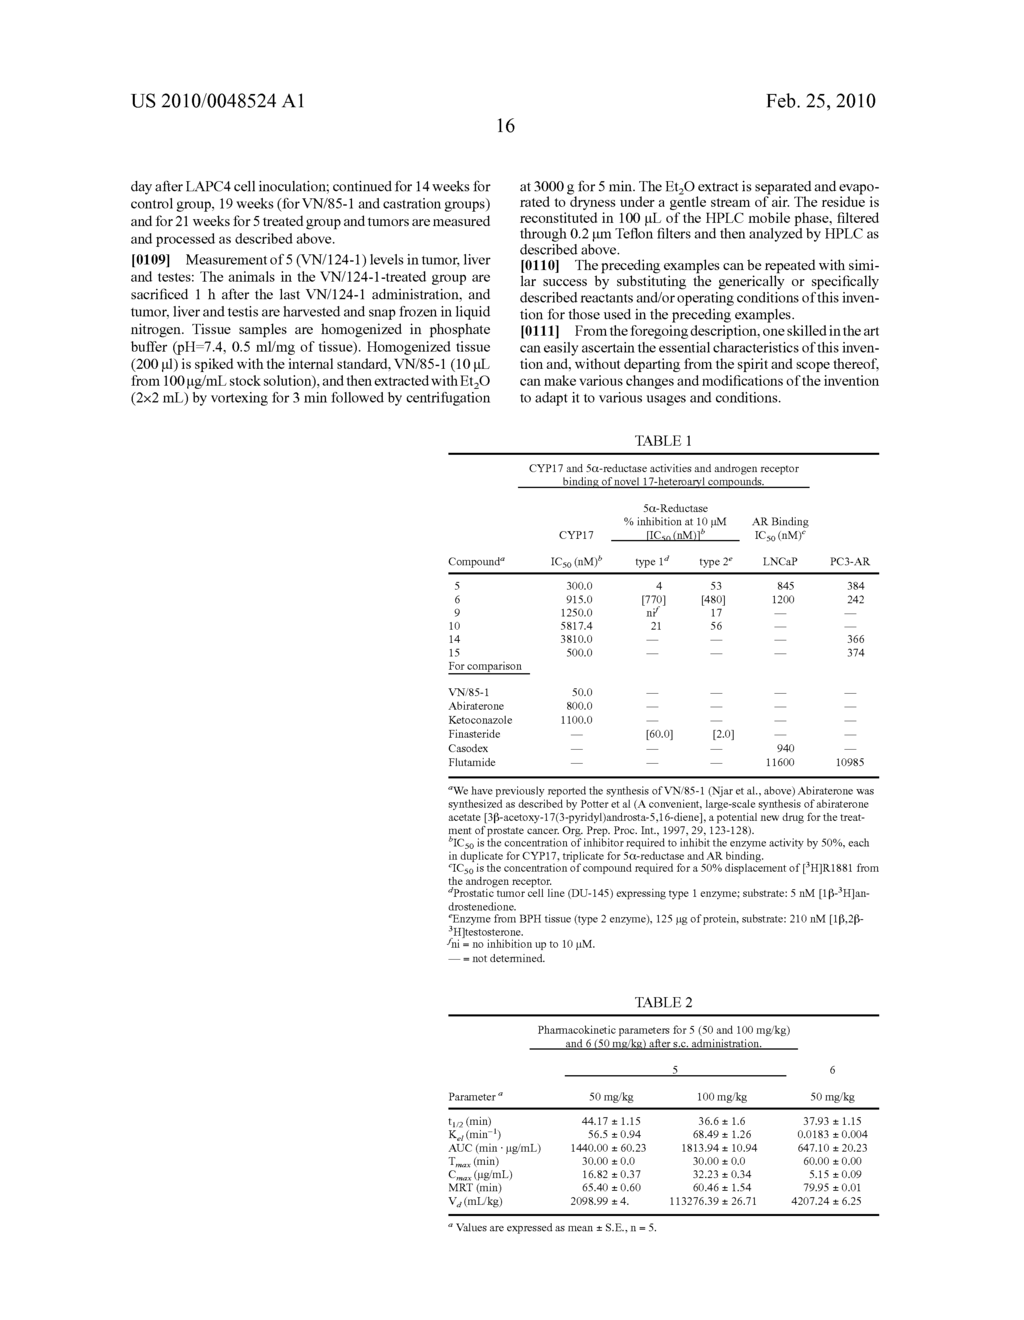 Novel C-17-Heteroaryl Steroidal CYP17 Inhibitors/Antiandrogens;Synthesis In Vitro Biological Activities, Pharmacokinetics and Antitumor Activity - diagram, schematic, and image 25